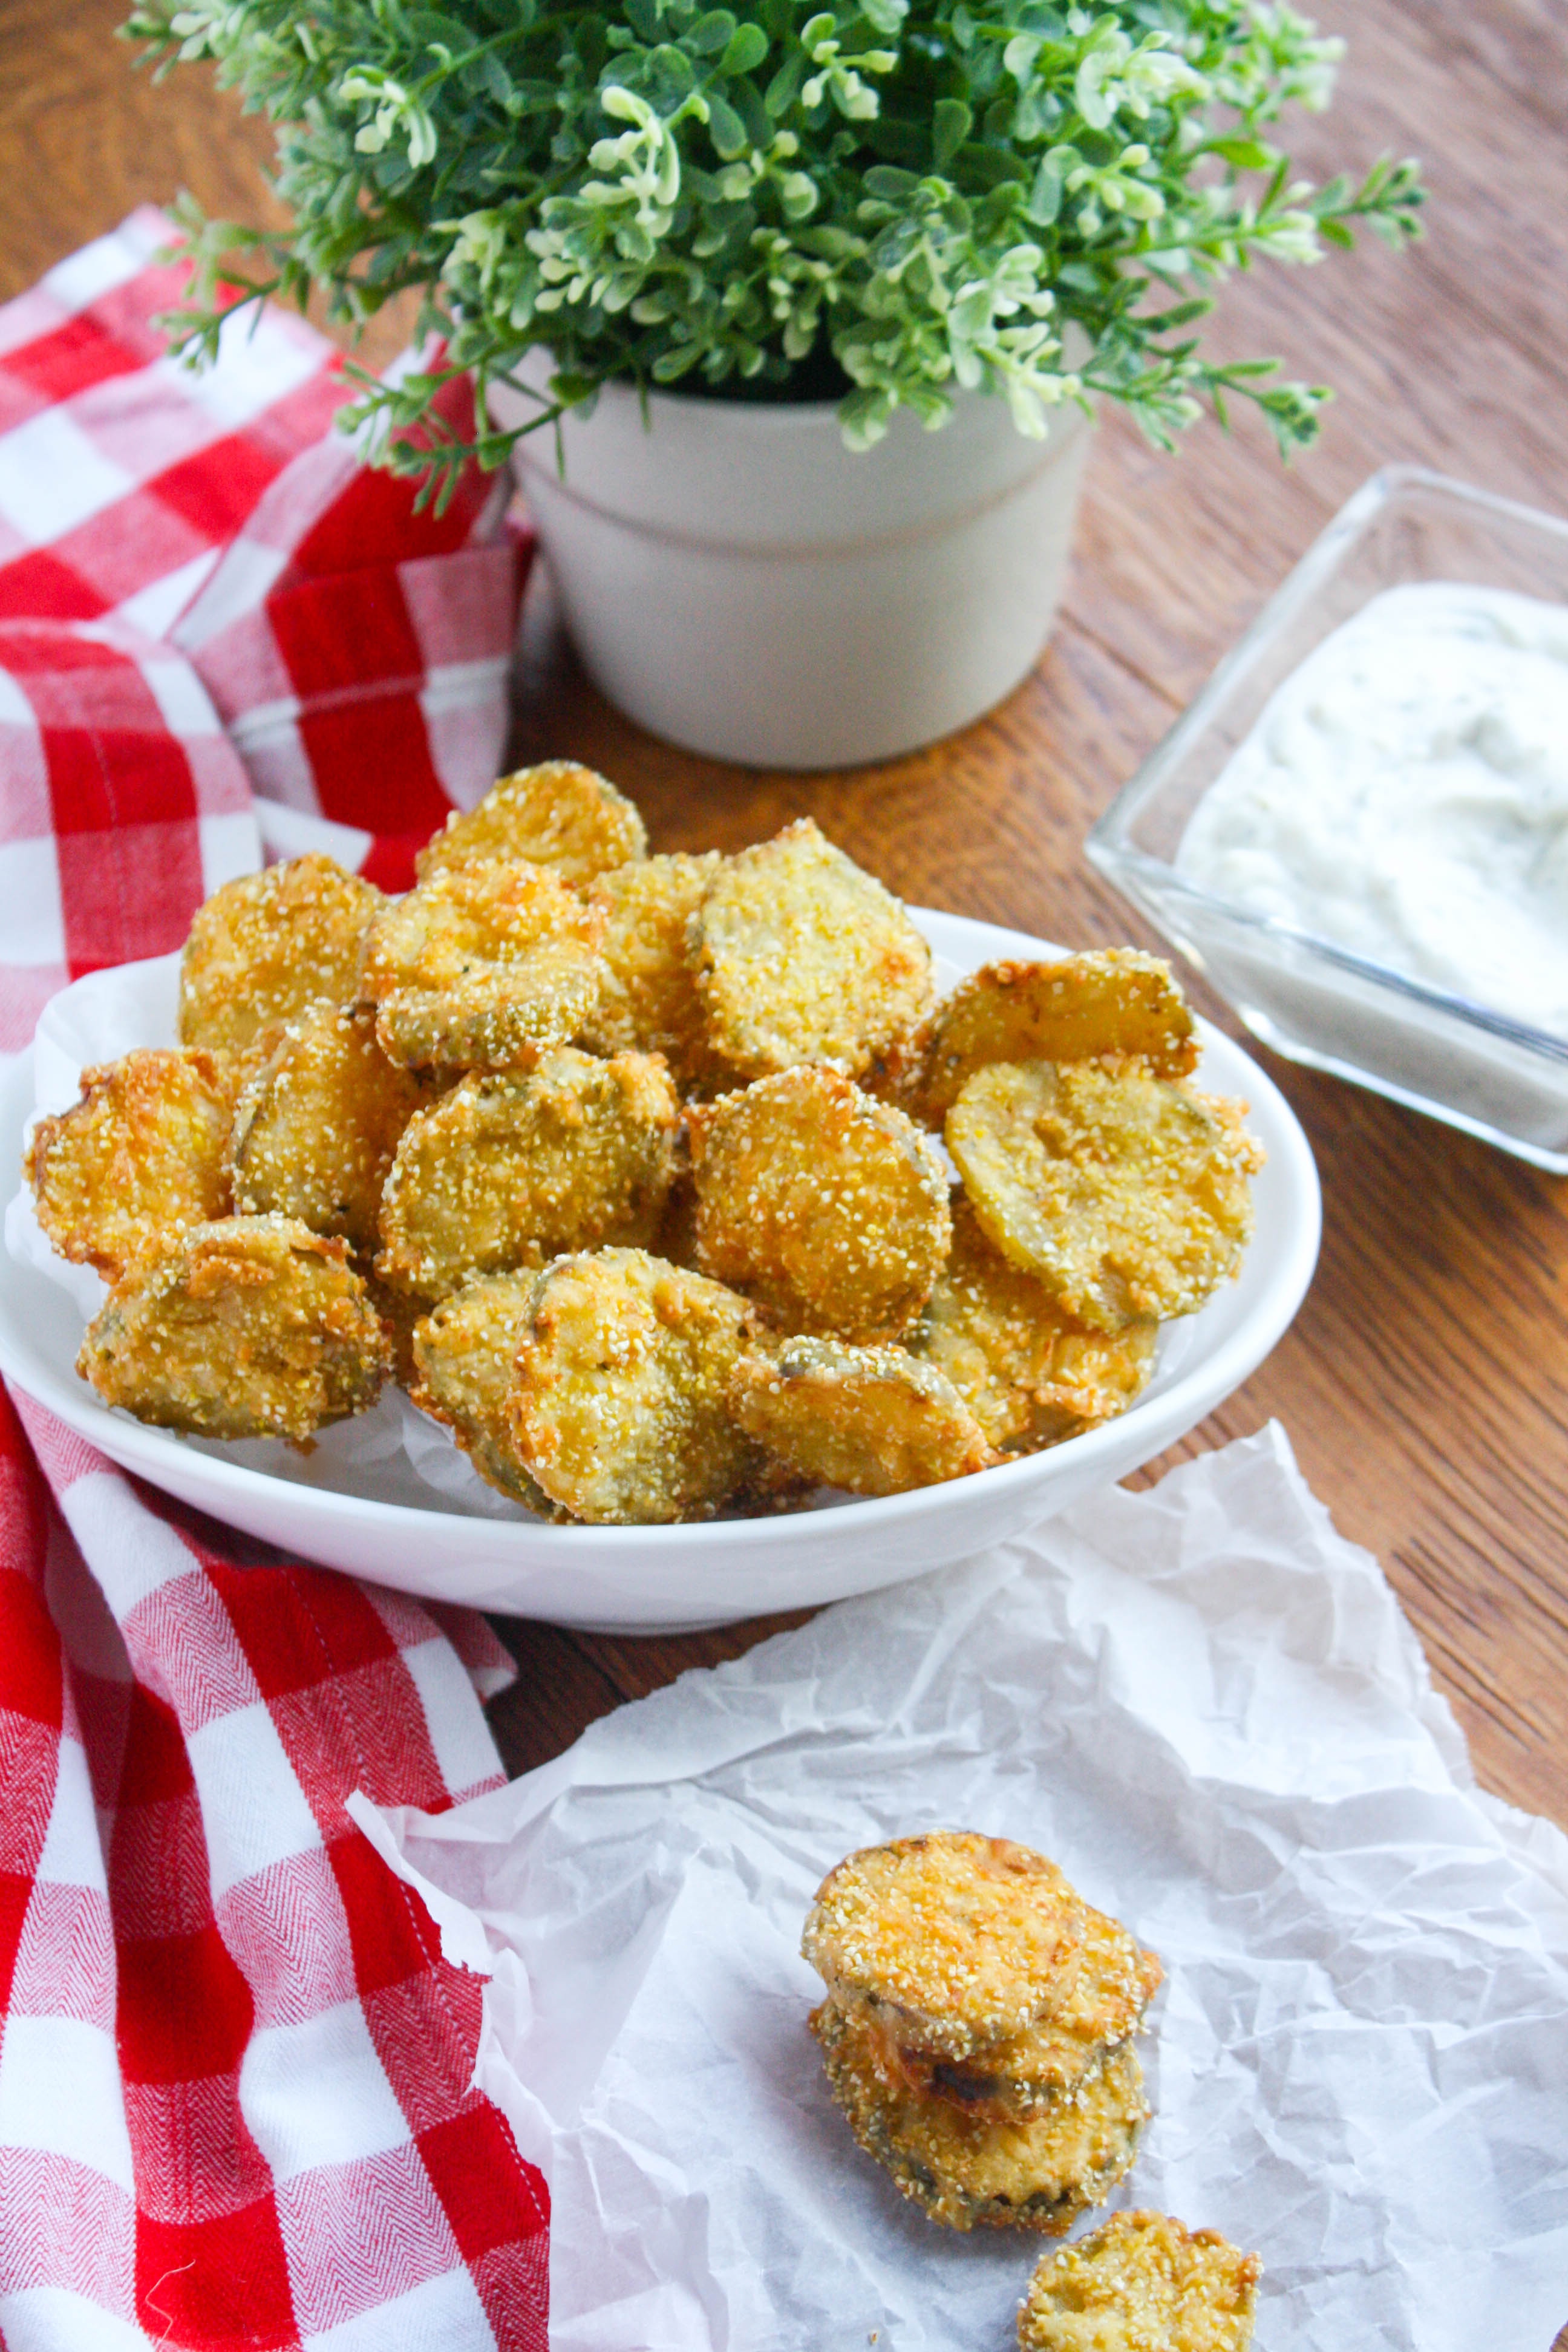 Fried Pickles with Homemade Buttermilk Ranch Dressing are a delightful snack! You'll love these fried pickles with the cool and tasty dip as a snack!